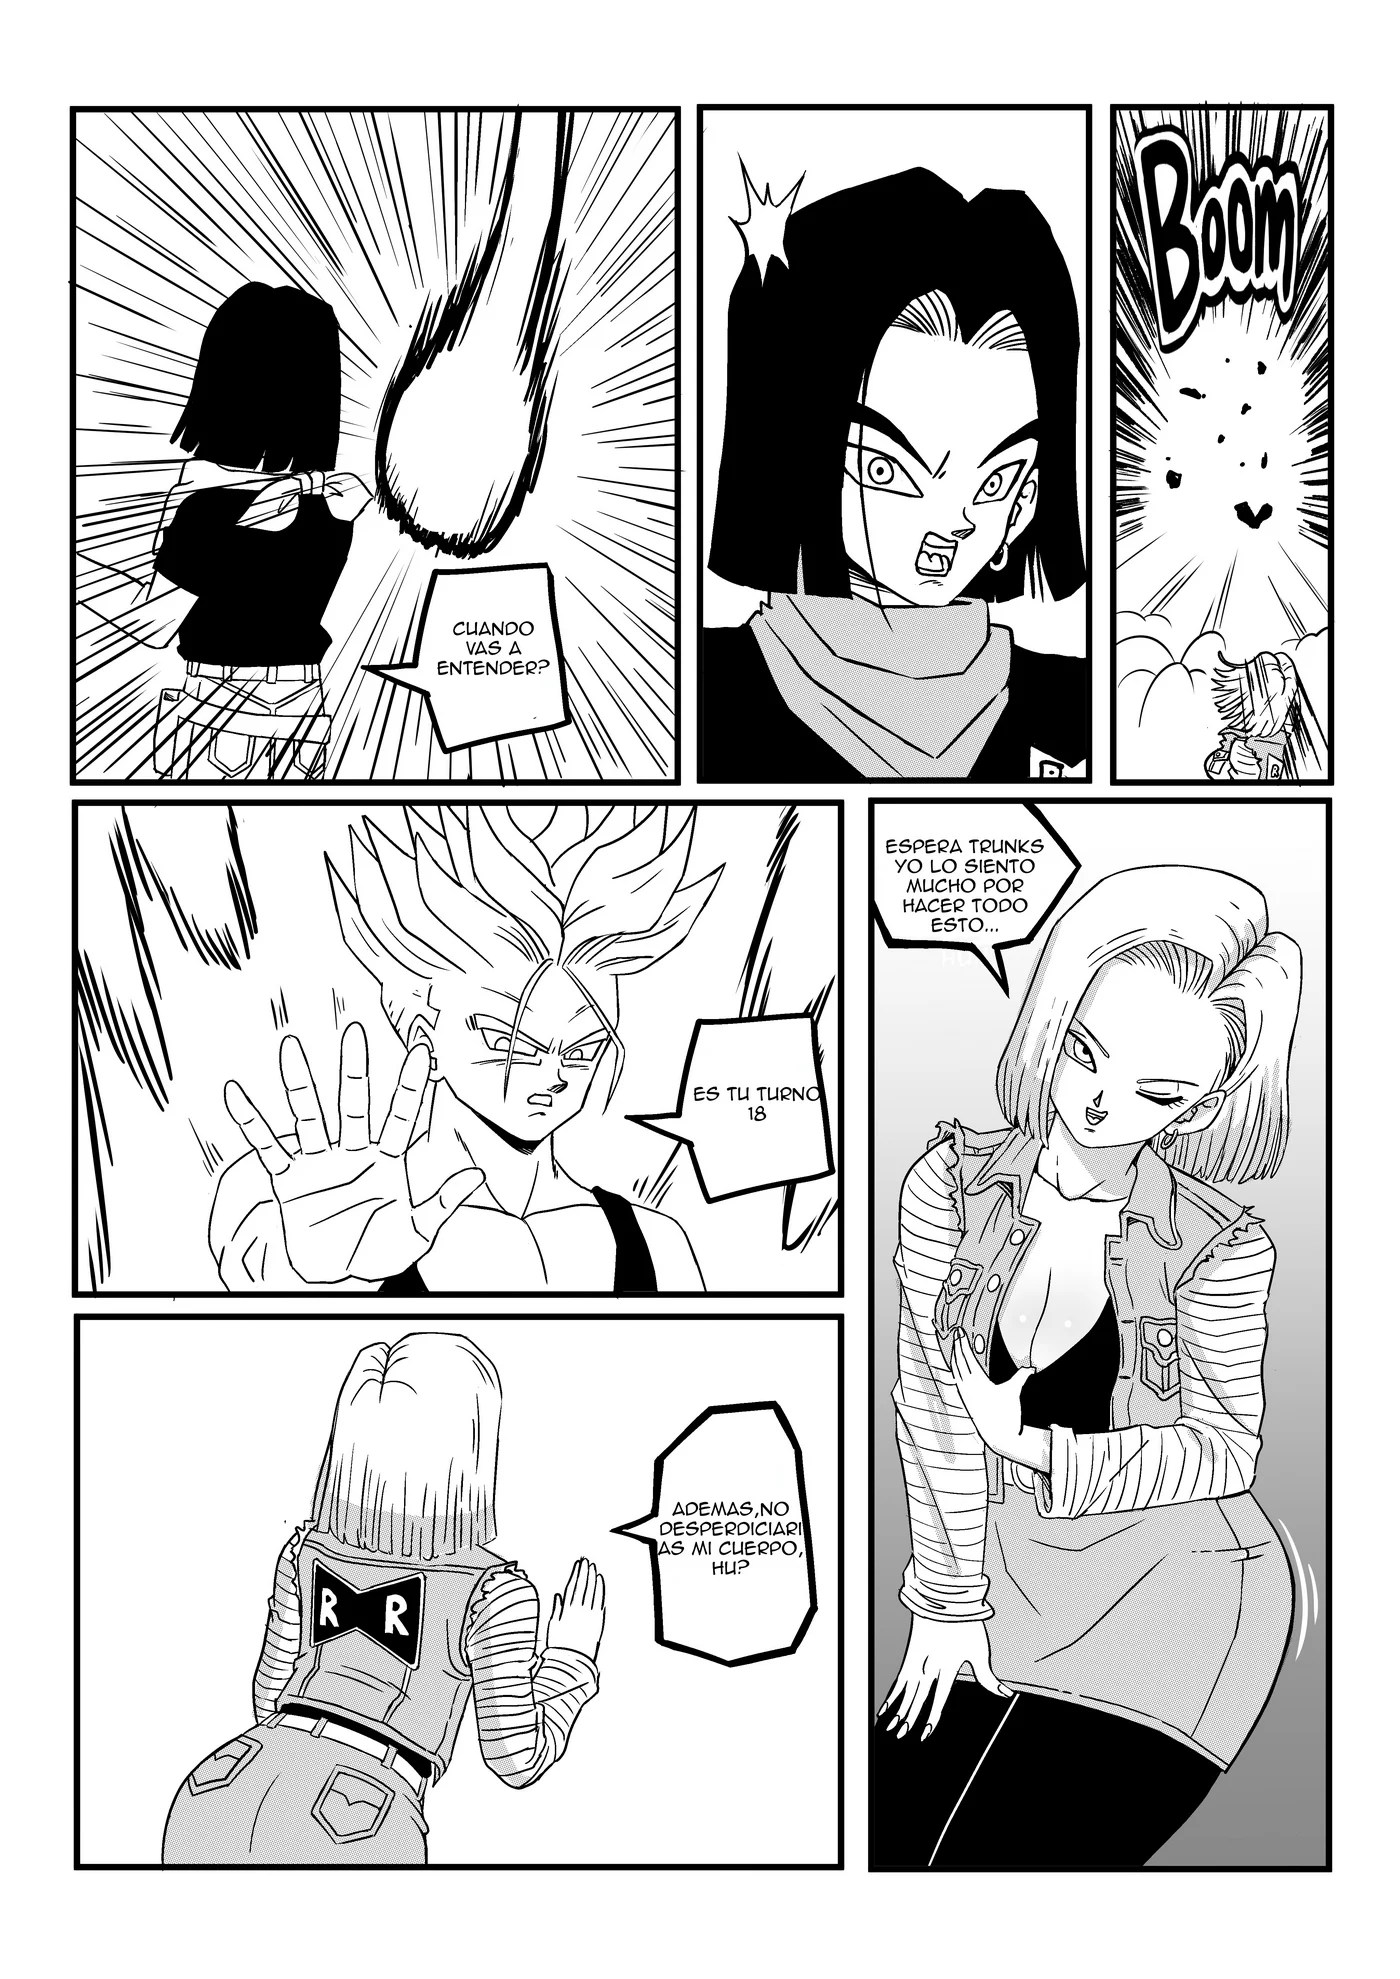 Android 18 Stays in the Future – Pink Pawg - 318b29d16c2769a1c2796f61fc9b2567